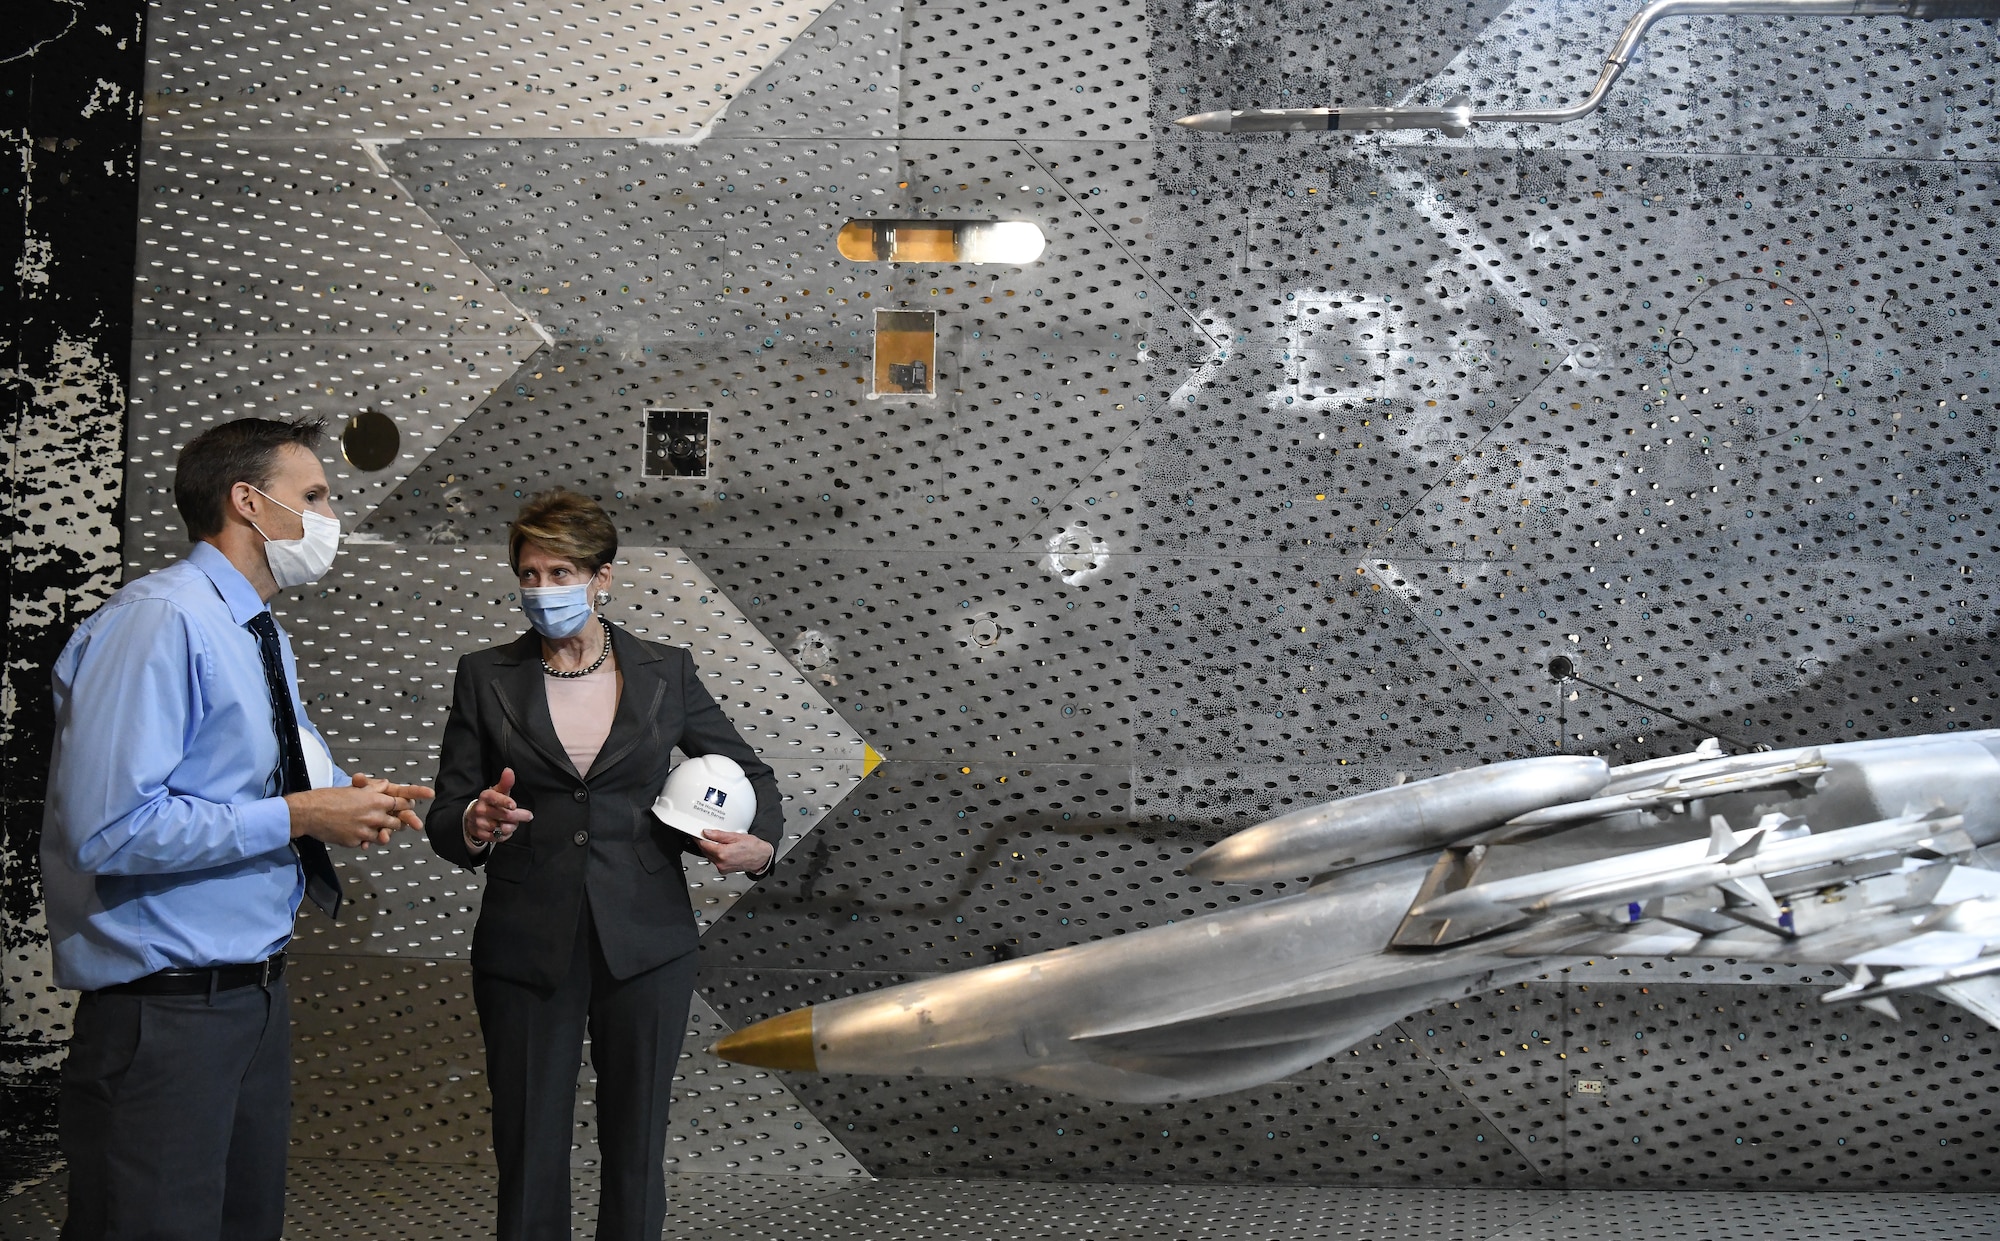 Dr. Rich Roberts, flight commander for store separation, speaks with Secretary of the Air Force Barbara Barrett about a store separation test of an AARGM-ER from an F-18 Super Hornet using models in the Arnold Engineering Development Complex 16-foot Transonic Wind Tunnel at Arnold Air Force Base, Tenn., June 18, 2020. (U.S. Air Force photos by Jill Pickett)